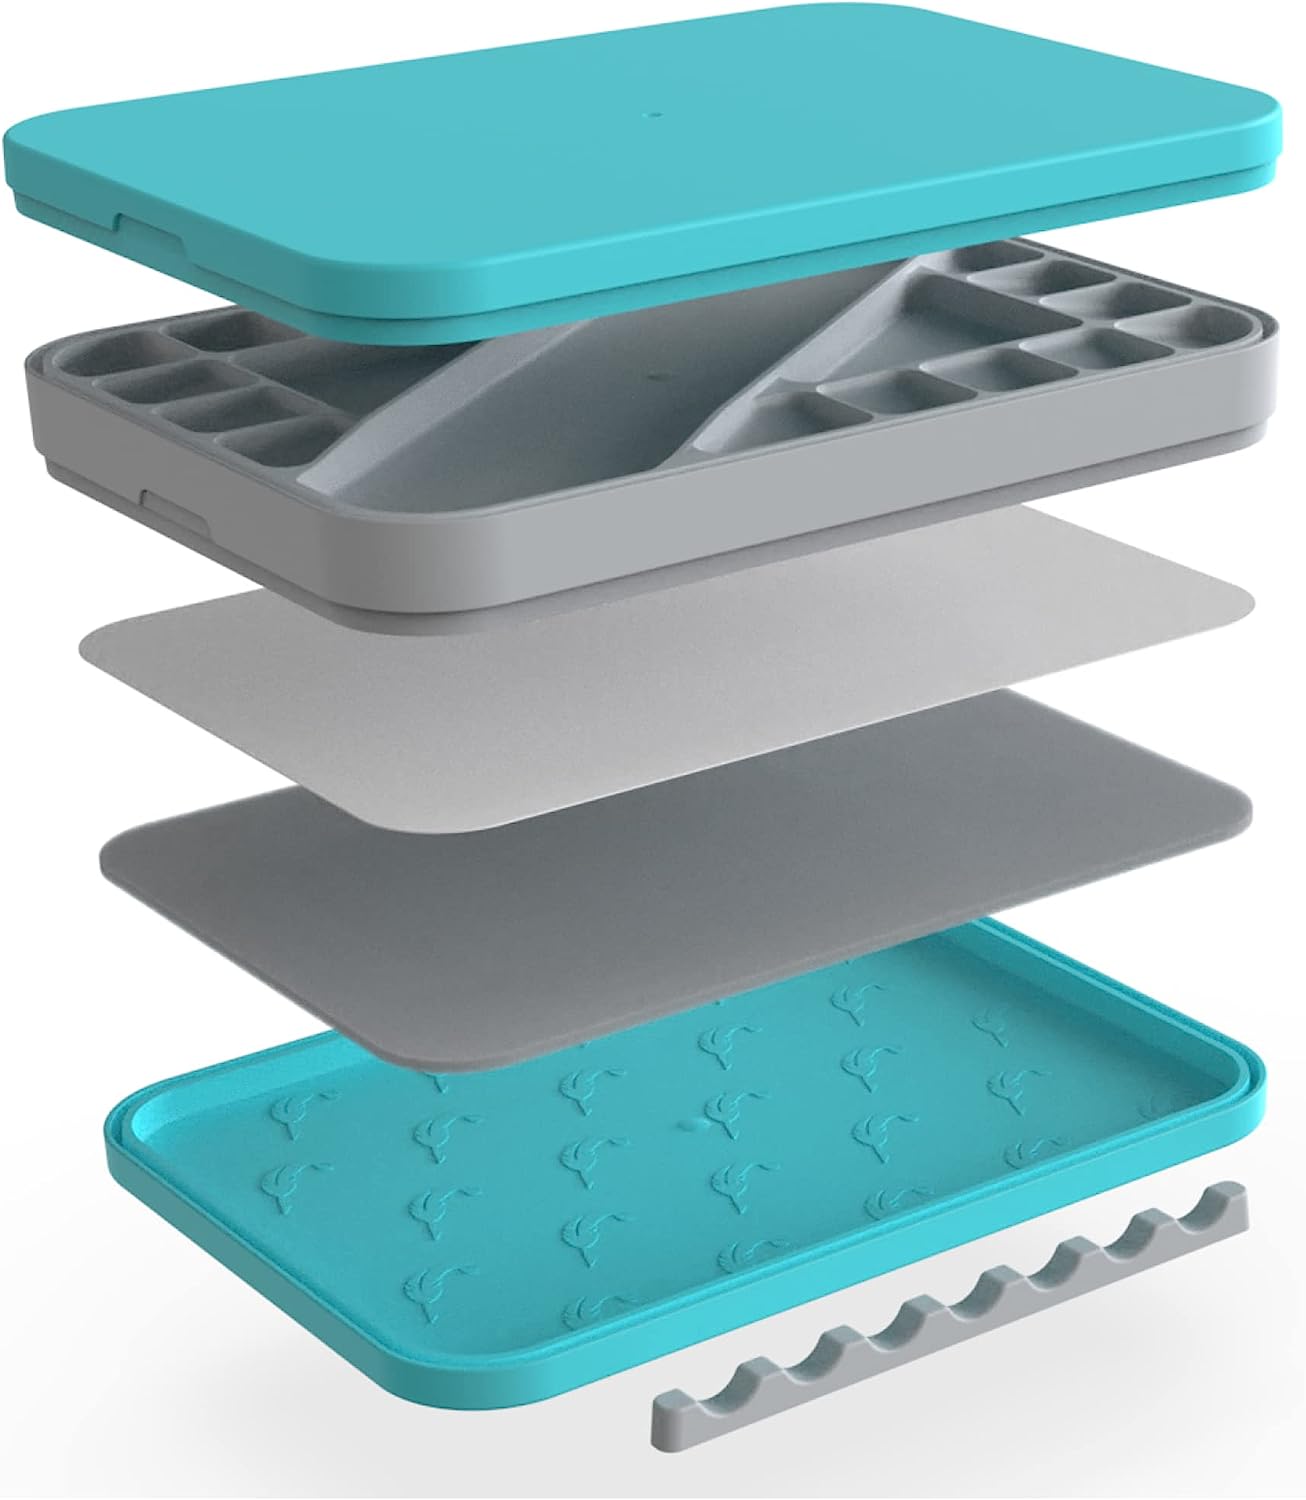 WetNDri Paint Tray Pallet for Painting. Stay Wet [...]